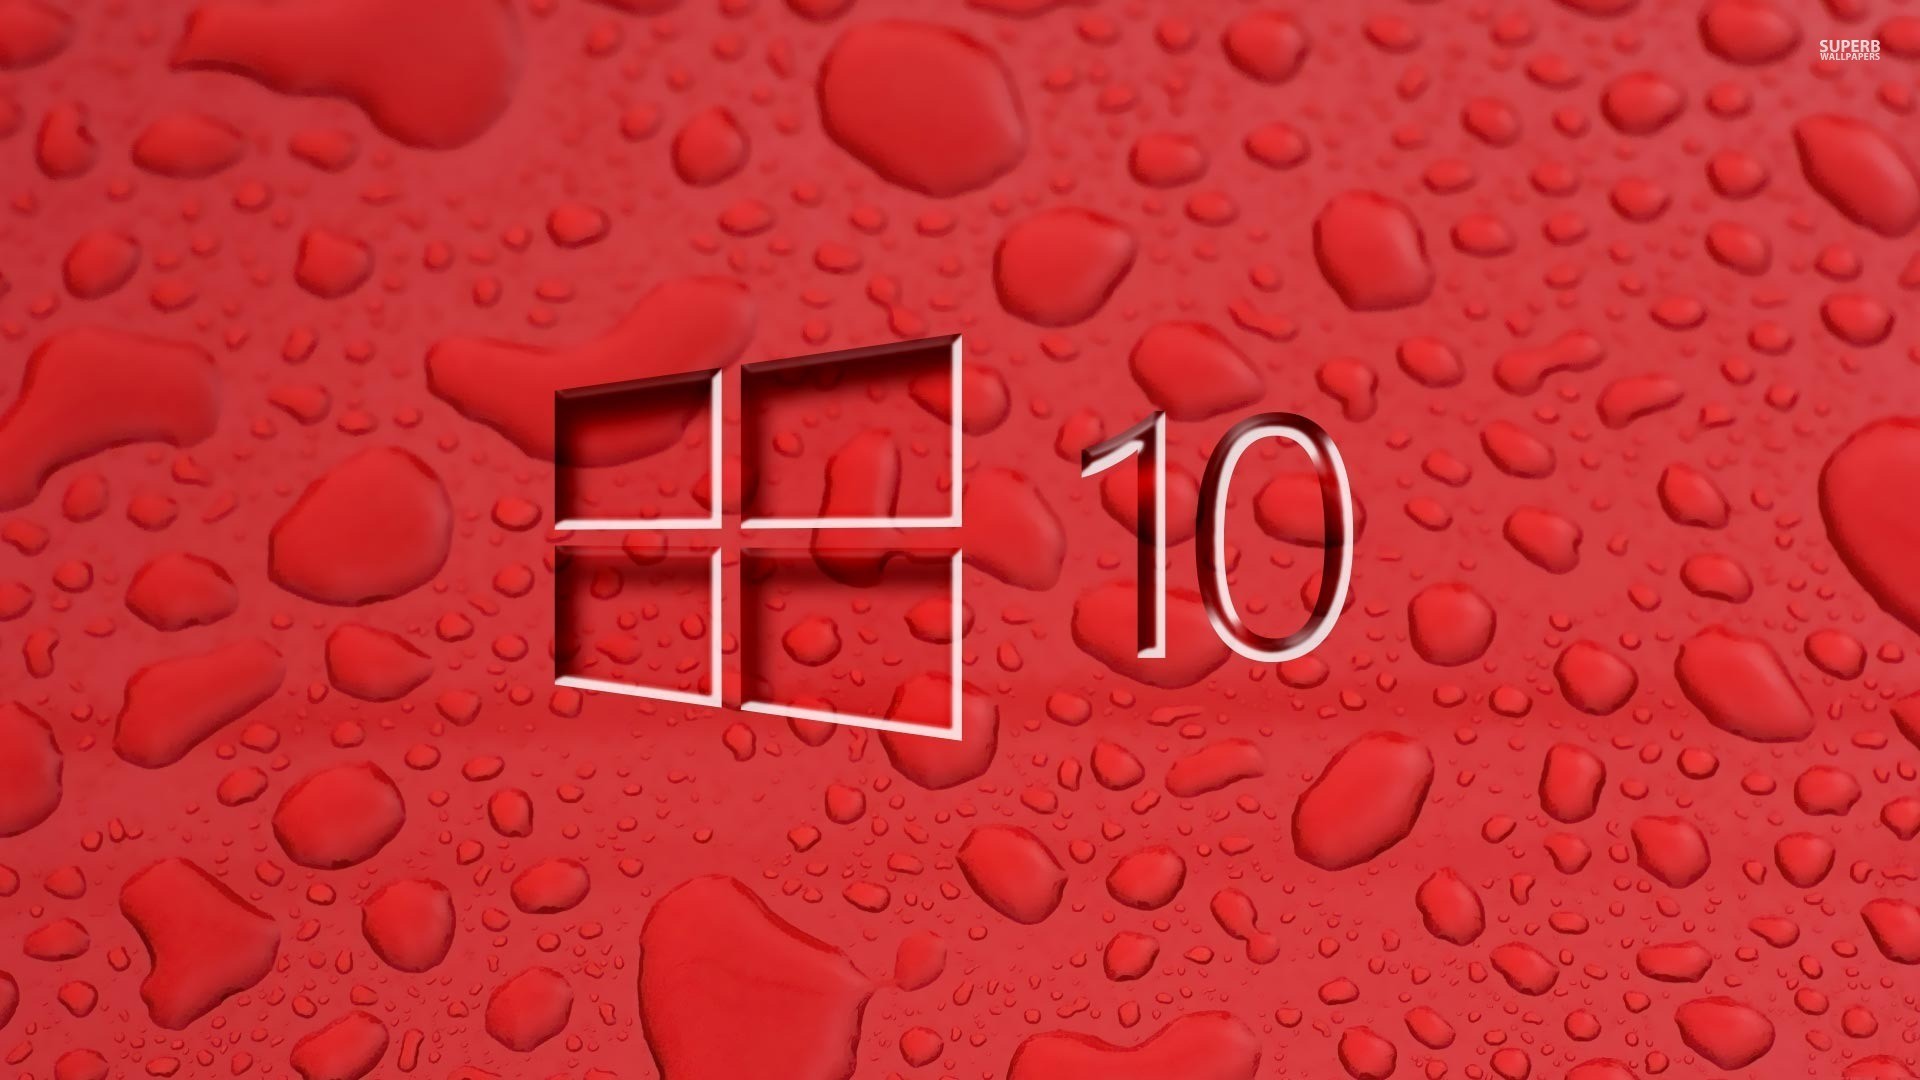 Red Windows 10 Wallpaper HD (71+ images)